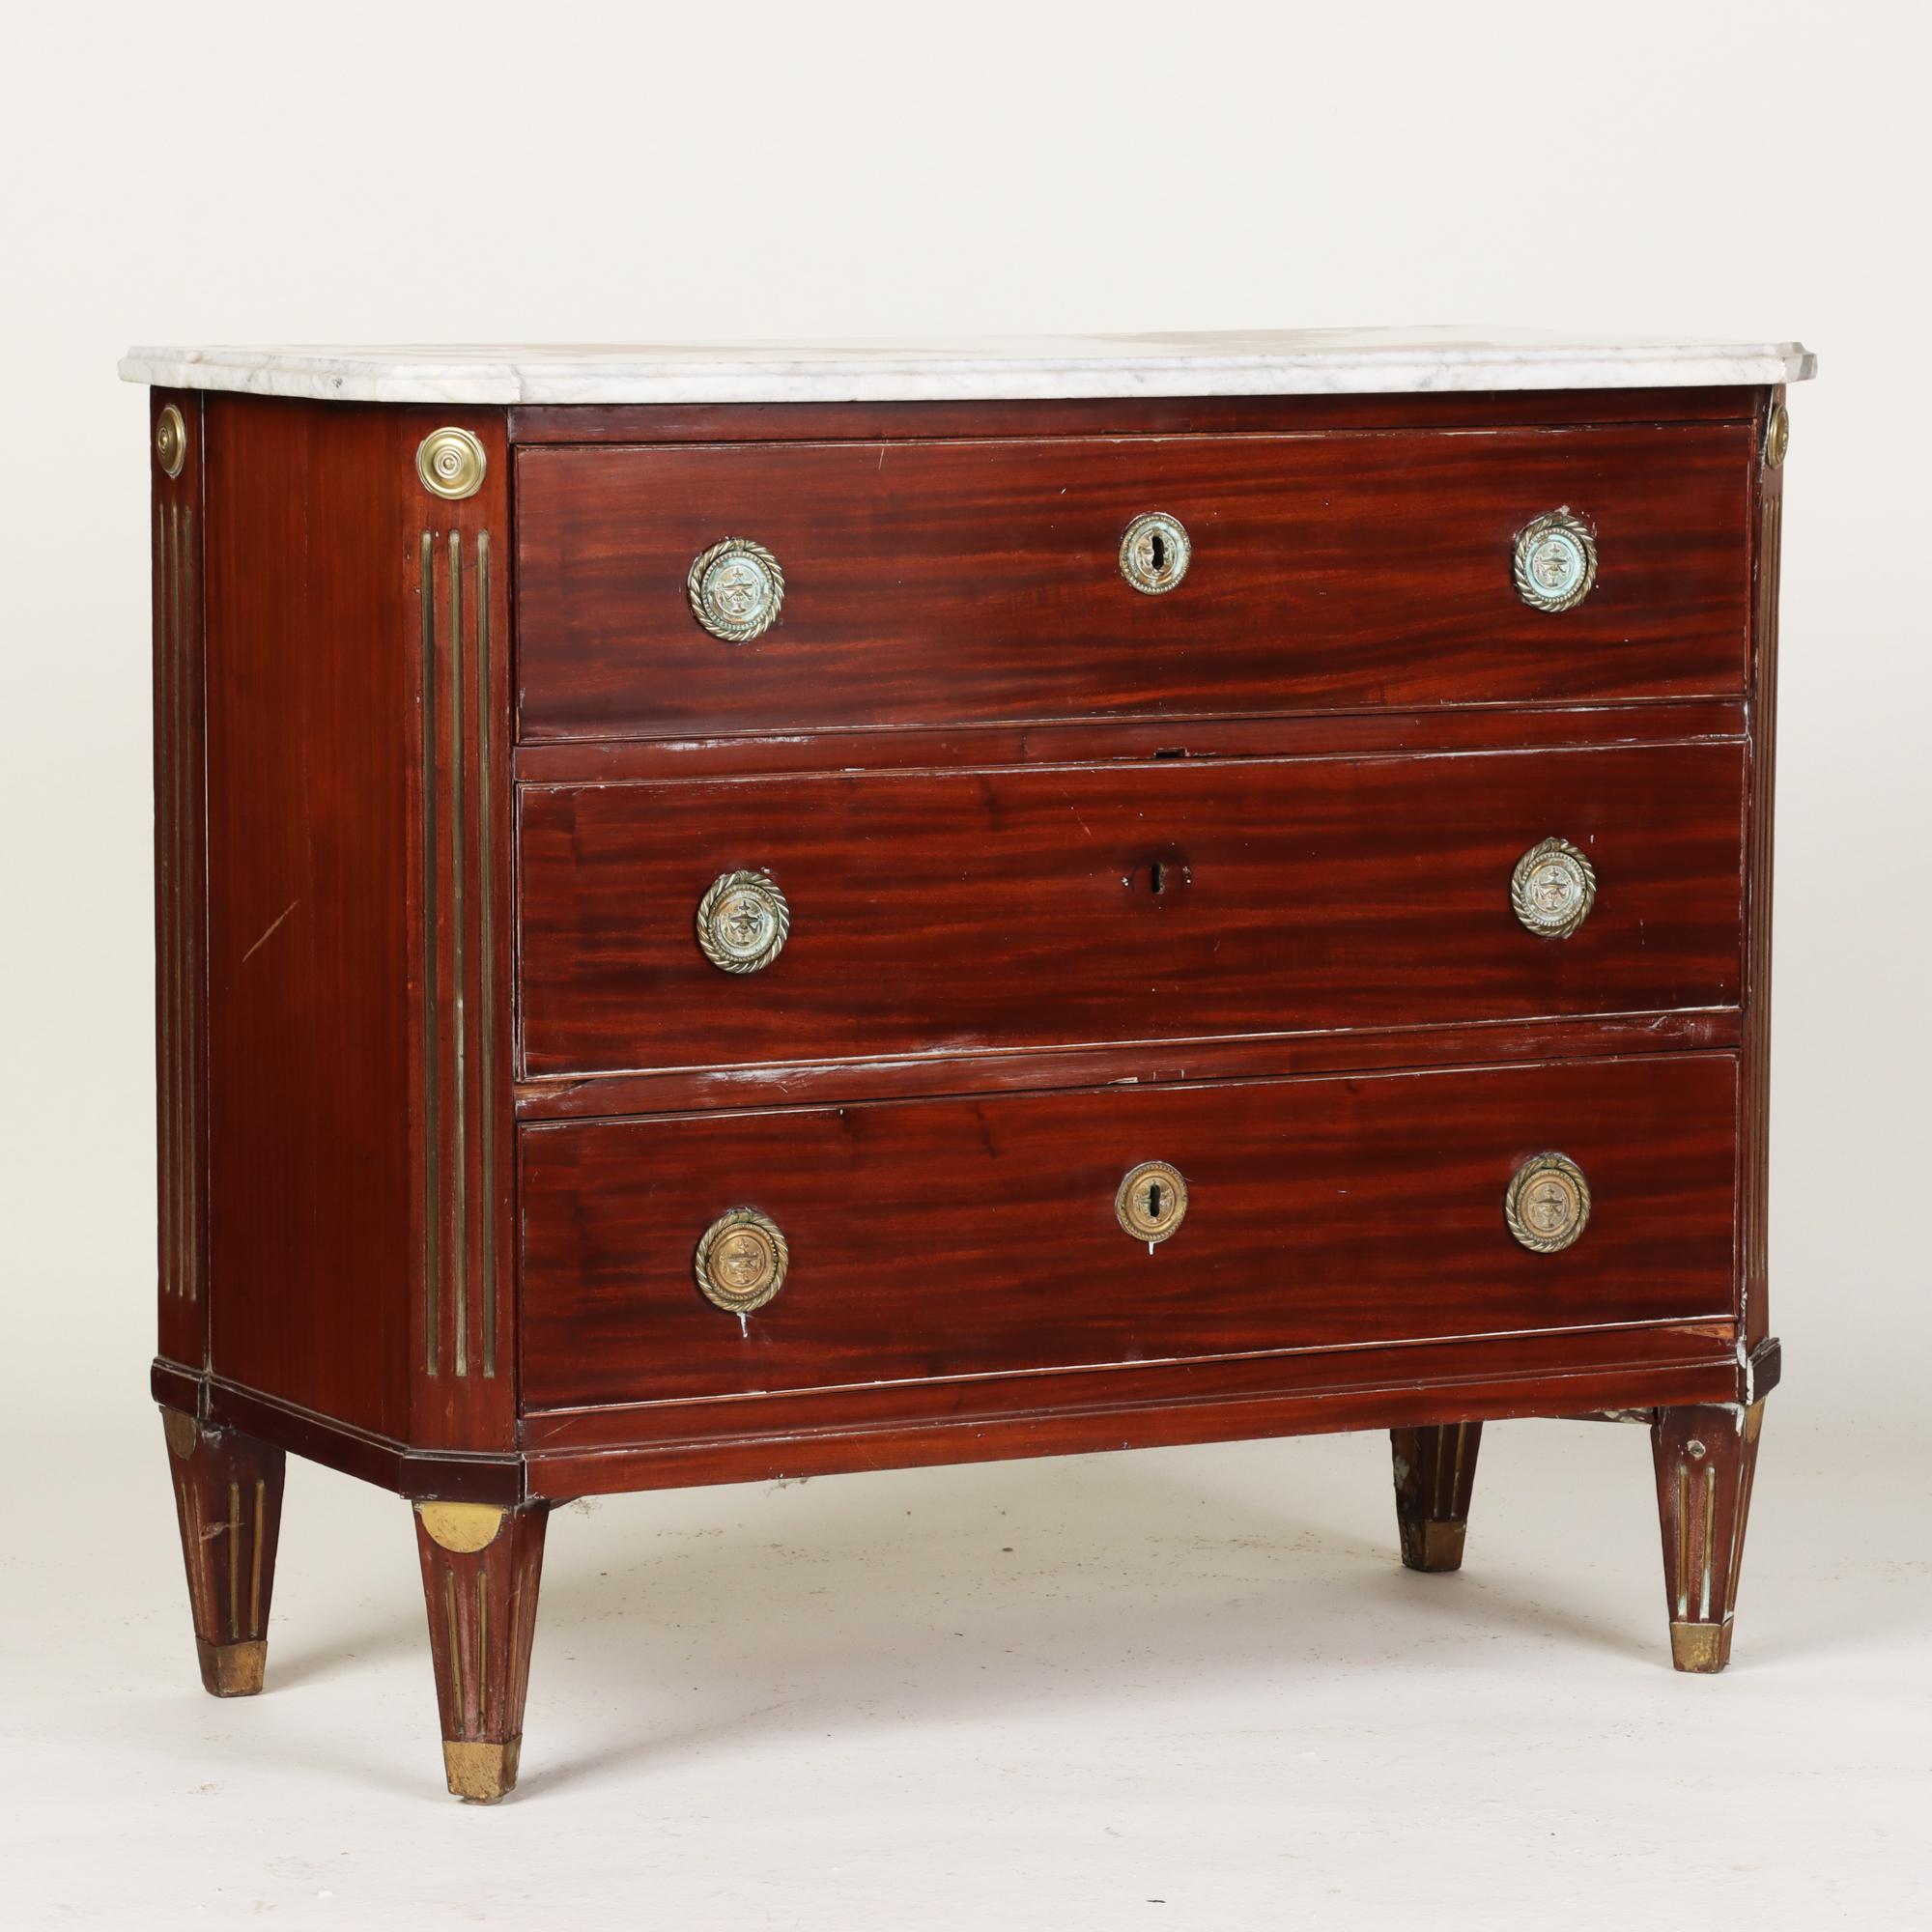 European Russian Neoclassical Brass Mounted Mahogany Commode, Early Nineteenth Century